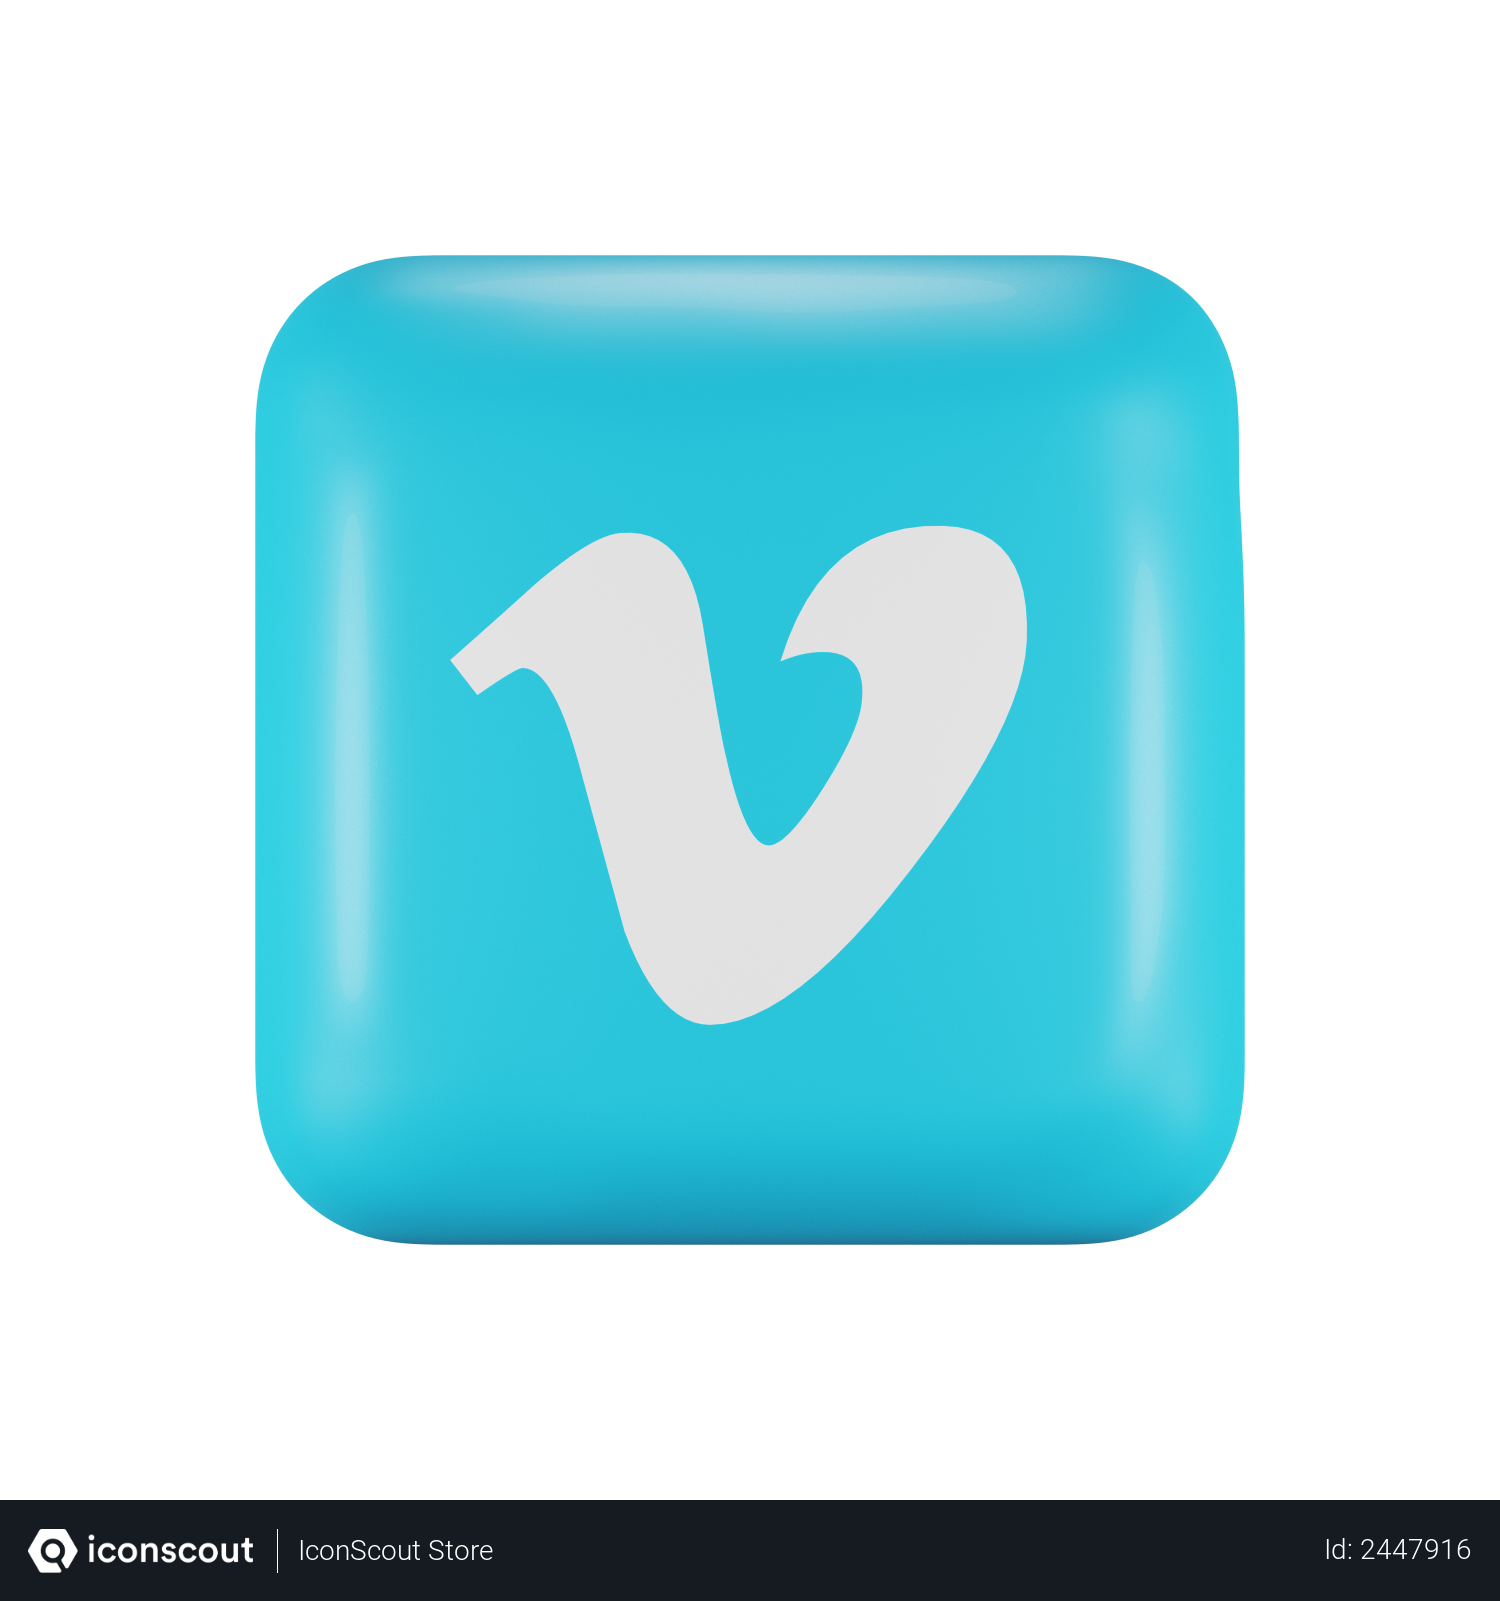 Vimeo PNG Transparent Images Free Download | Vector Files | Pngtree